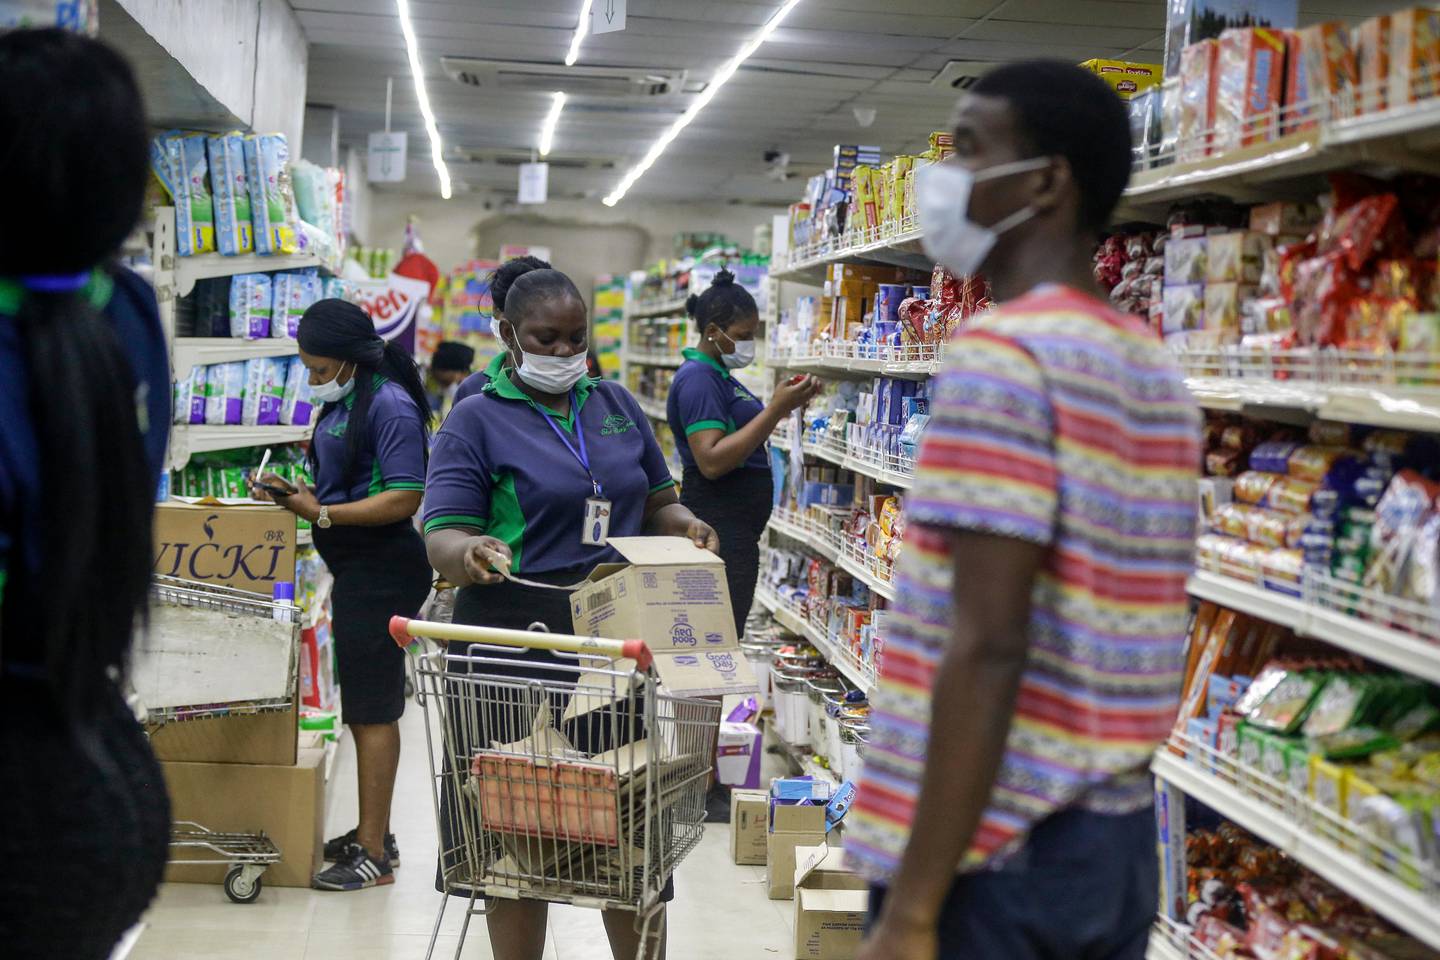 Shop assistants wearing face masks to prevent against the spread of the new coronavirus take stock in a supermarket in Lagos, Nigeria Friday, March 27, 2020. The new coronavirus causes mild or moderate symptoms for most people, but for some, especially older adults and people with existing health problems, it can cause more severe illness or death. (AP Photo/Sunday Alamba)